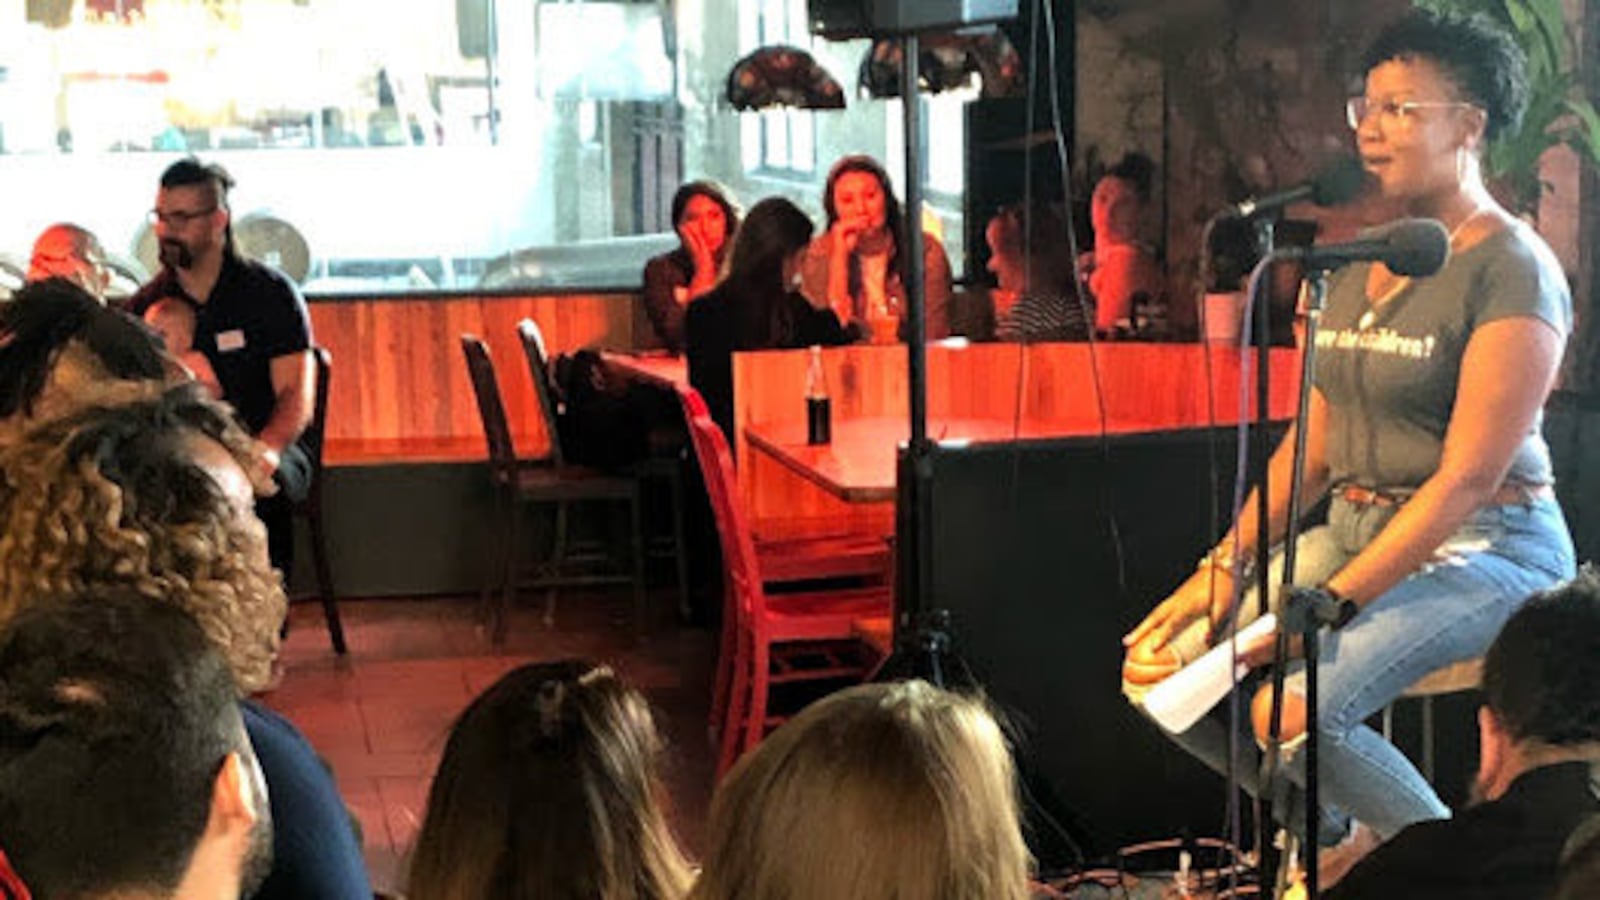 Chicago teacher Chanita Jones-Howard tells a story about her first years teaching special education at a Chalkbeat Chicago event in August 2019, at Marz Brewing in Bridgeport.